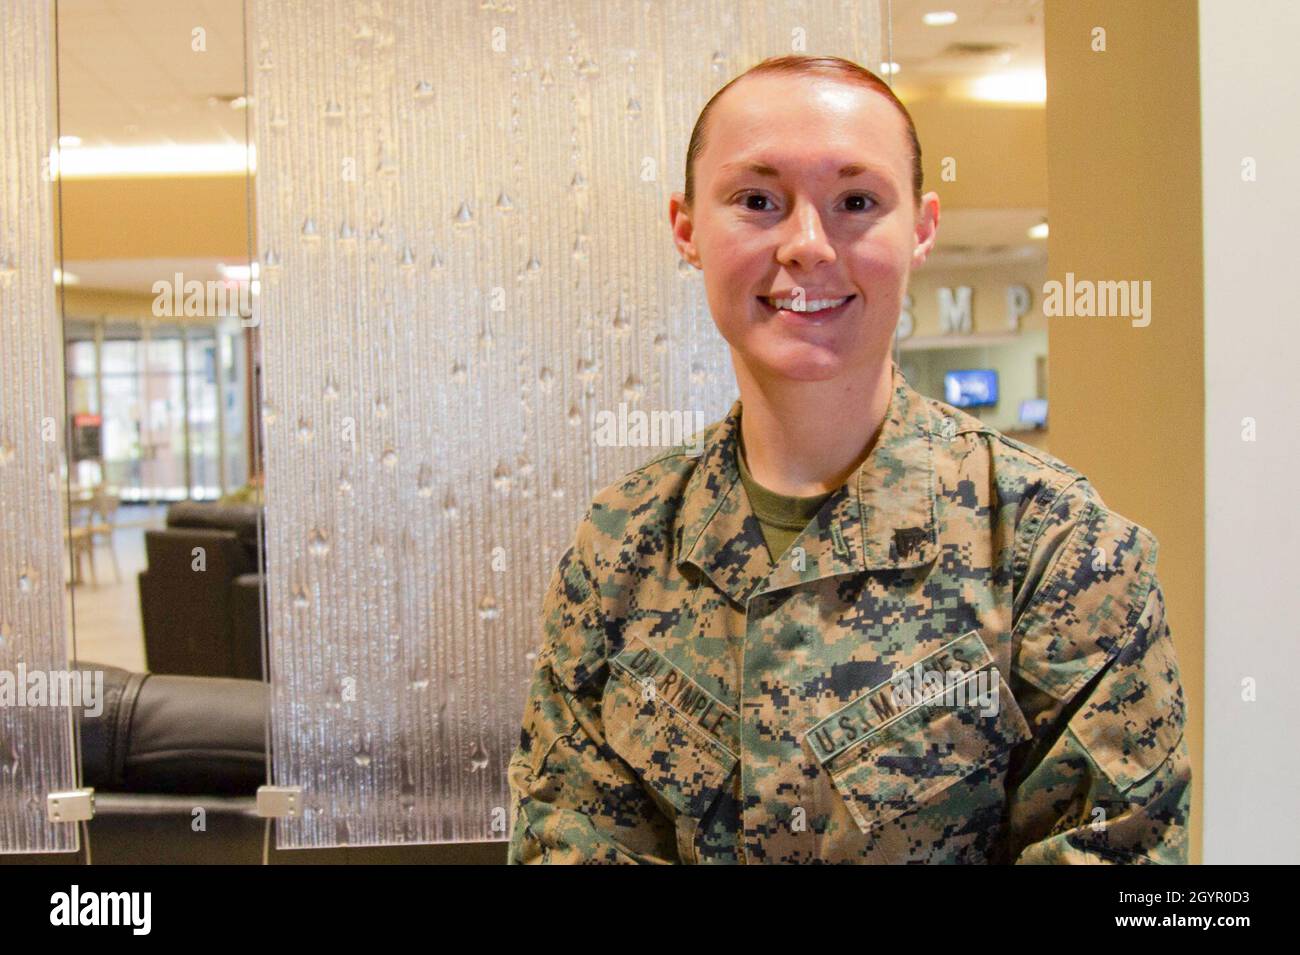 U.S. Marine Corps Cpl. Kristen Dalrymple, an air traffic control specialist with Headquarters and Headquarters Squadron, poses for a photo at the Single Marine Program New River Recreation Center on Marine Corps Air Station New River, North Carolina, Jan. 22, 2020. Dalrymple, a Topeka, Kansas native, enlisted into the Marine Corps in 2016. For her outstanding service and dedication to her Marines and the Single Marine Program, Dalrymple was recognized by the Jacksonville-Onslow Chamber of Commerce as the Service Member of the Month (SMOM) for December 2019. (U.S. Marine Corps photo by Cpl. Kar Stock Photo